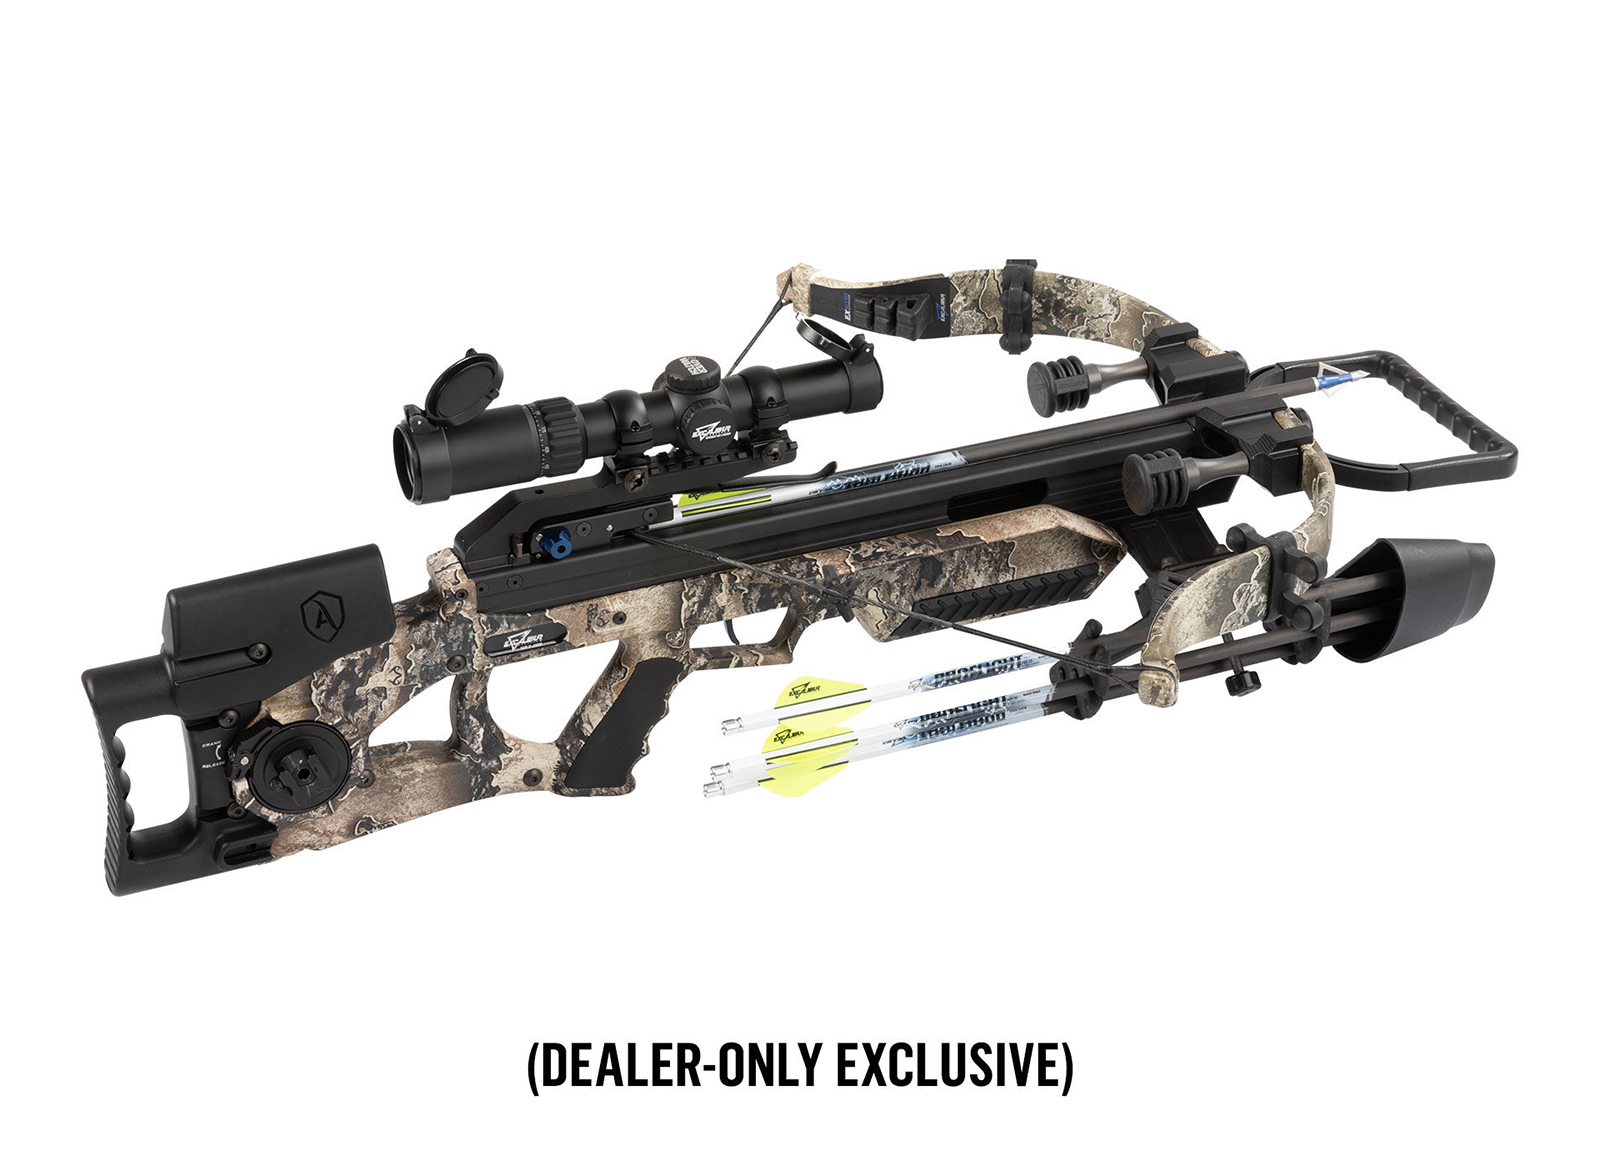 EXCALIBUR BALESTRA ASSASSIN EXTREME CAMO PACKAGE  WITH OVERWATCH SCOPE